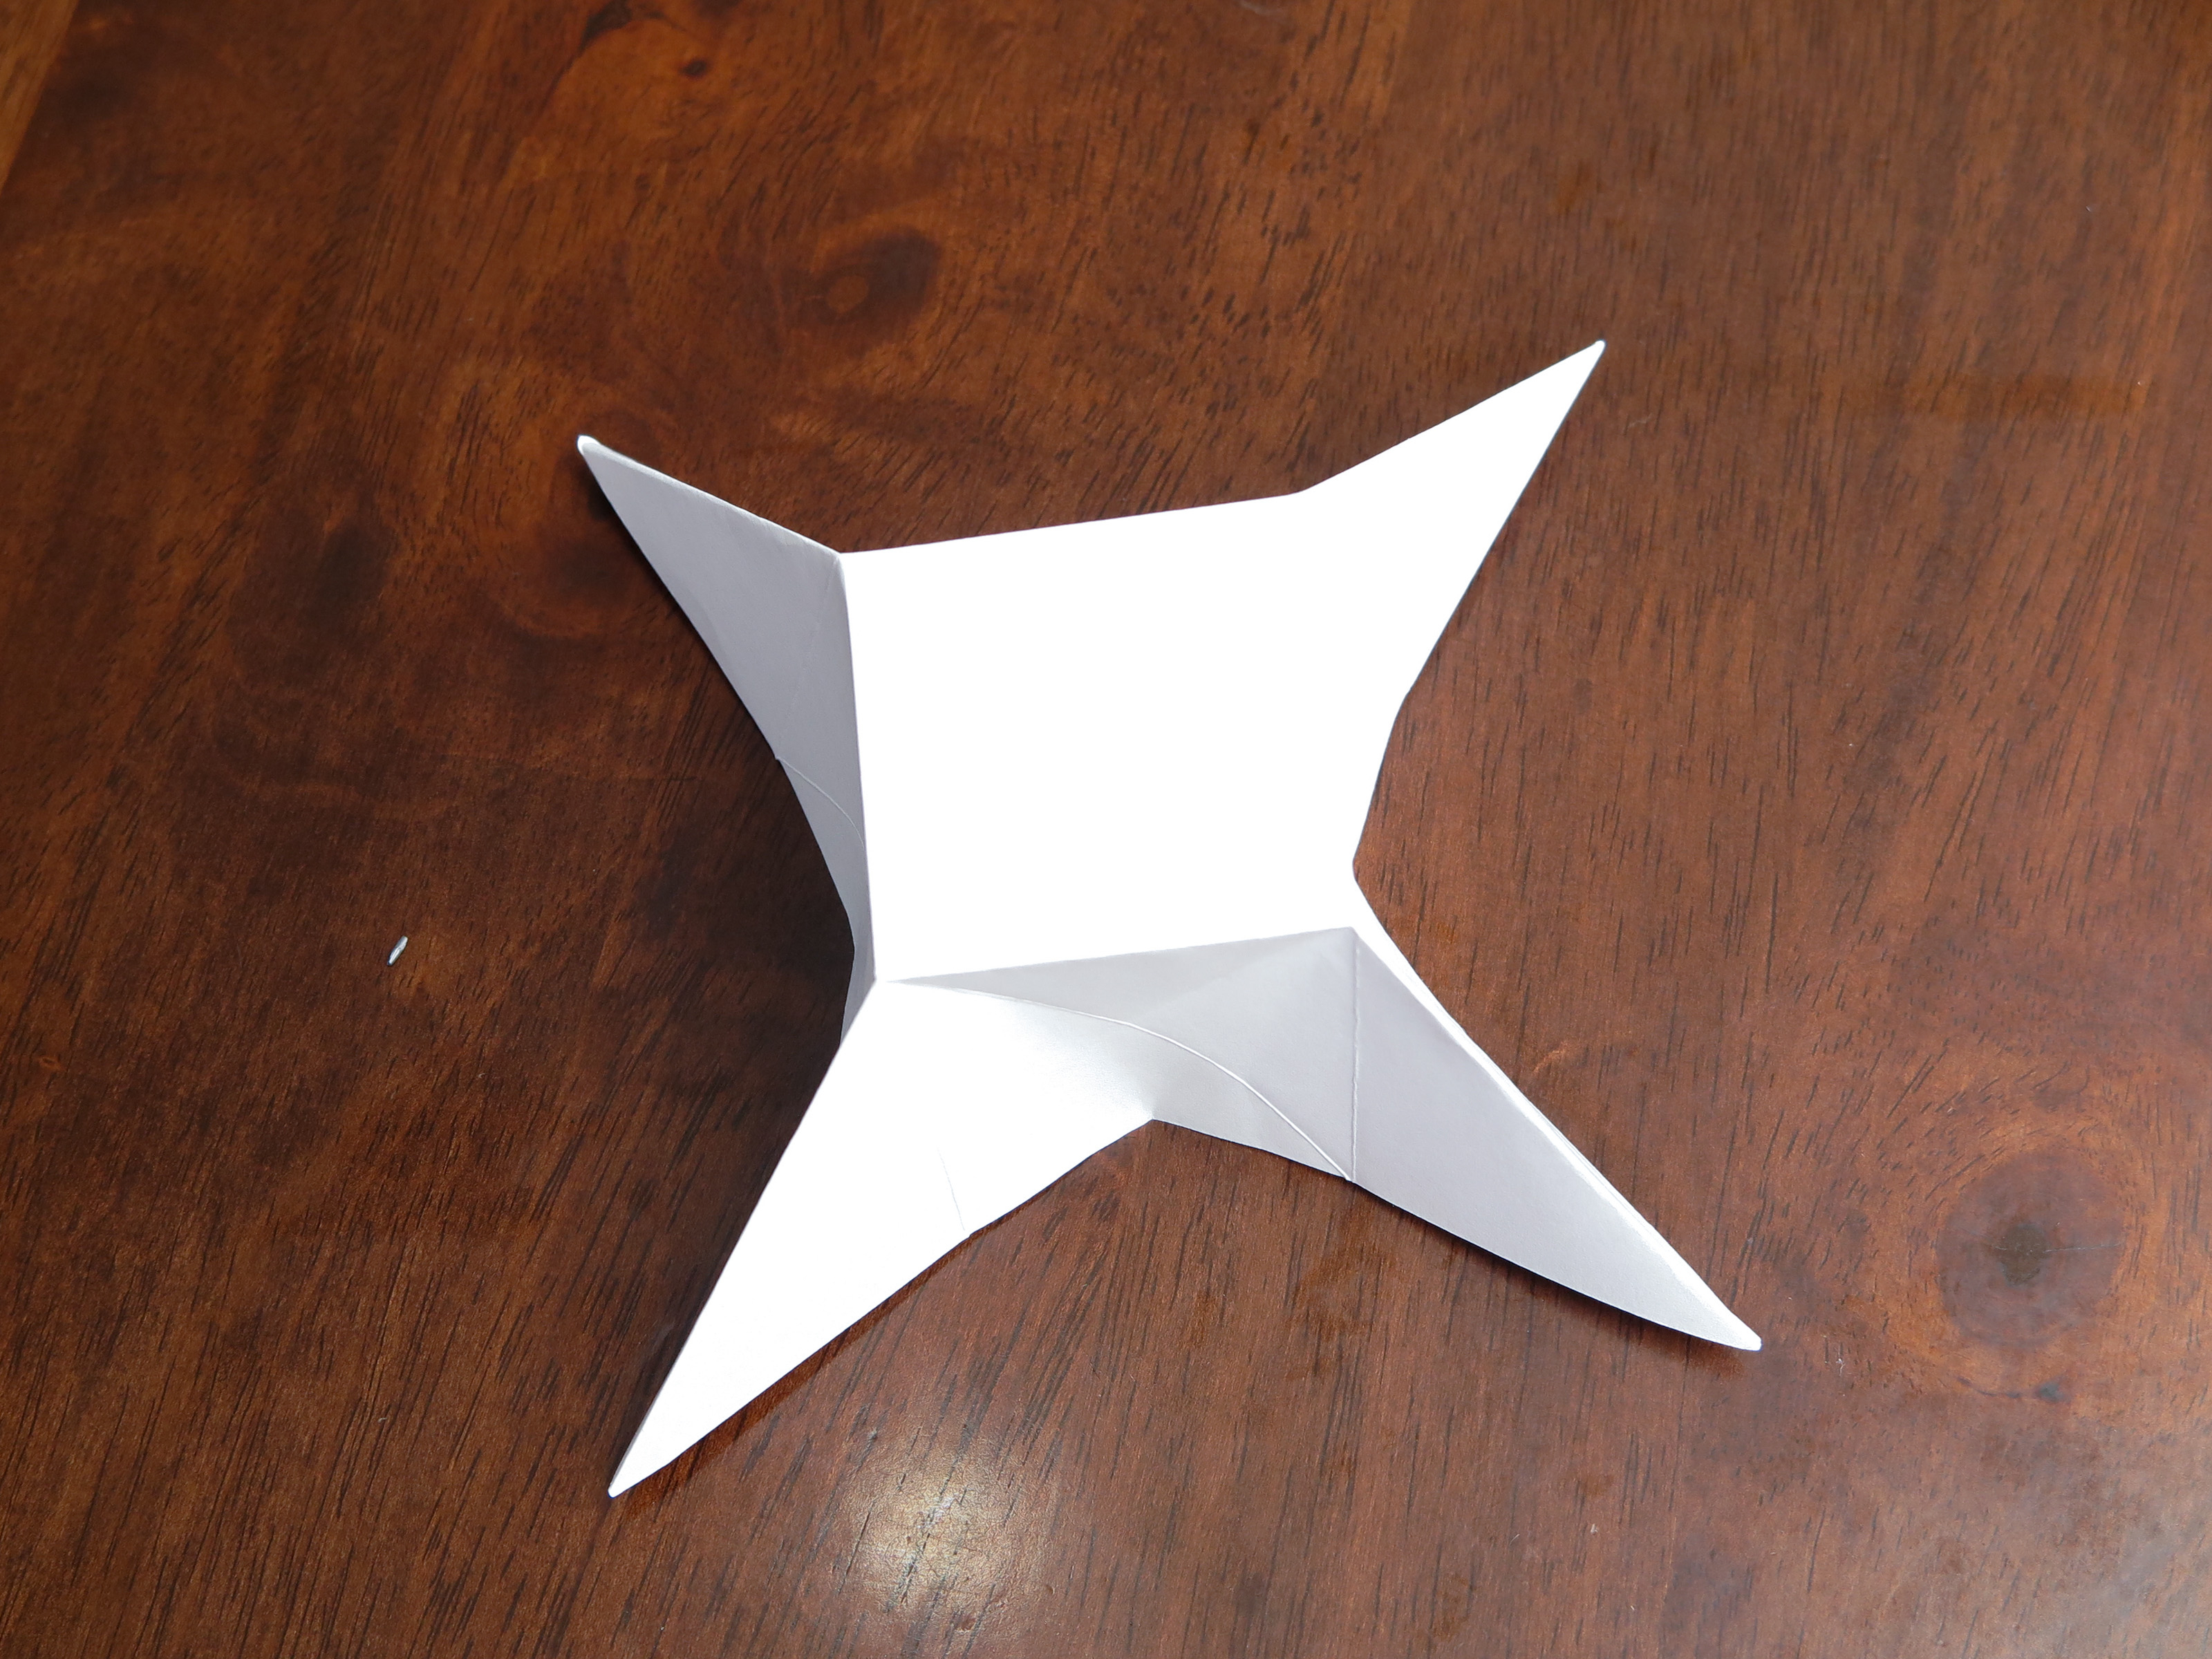 How To Make An Origami Star How To Make An Origami Star With Pictures Wikihow